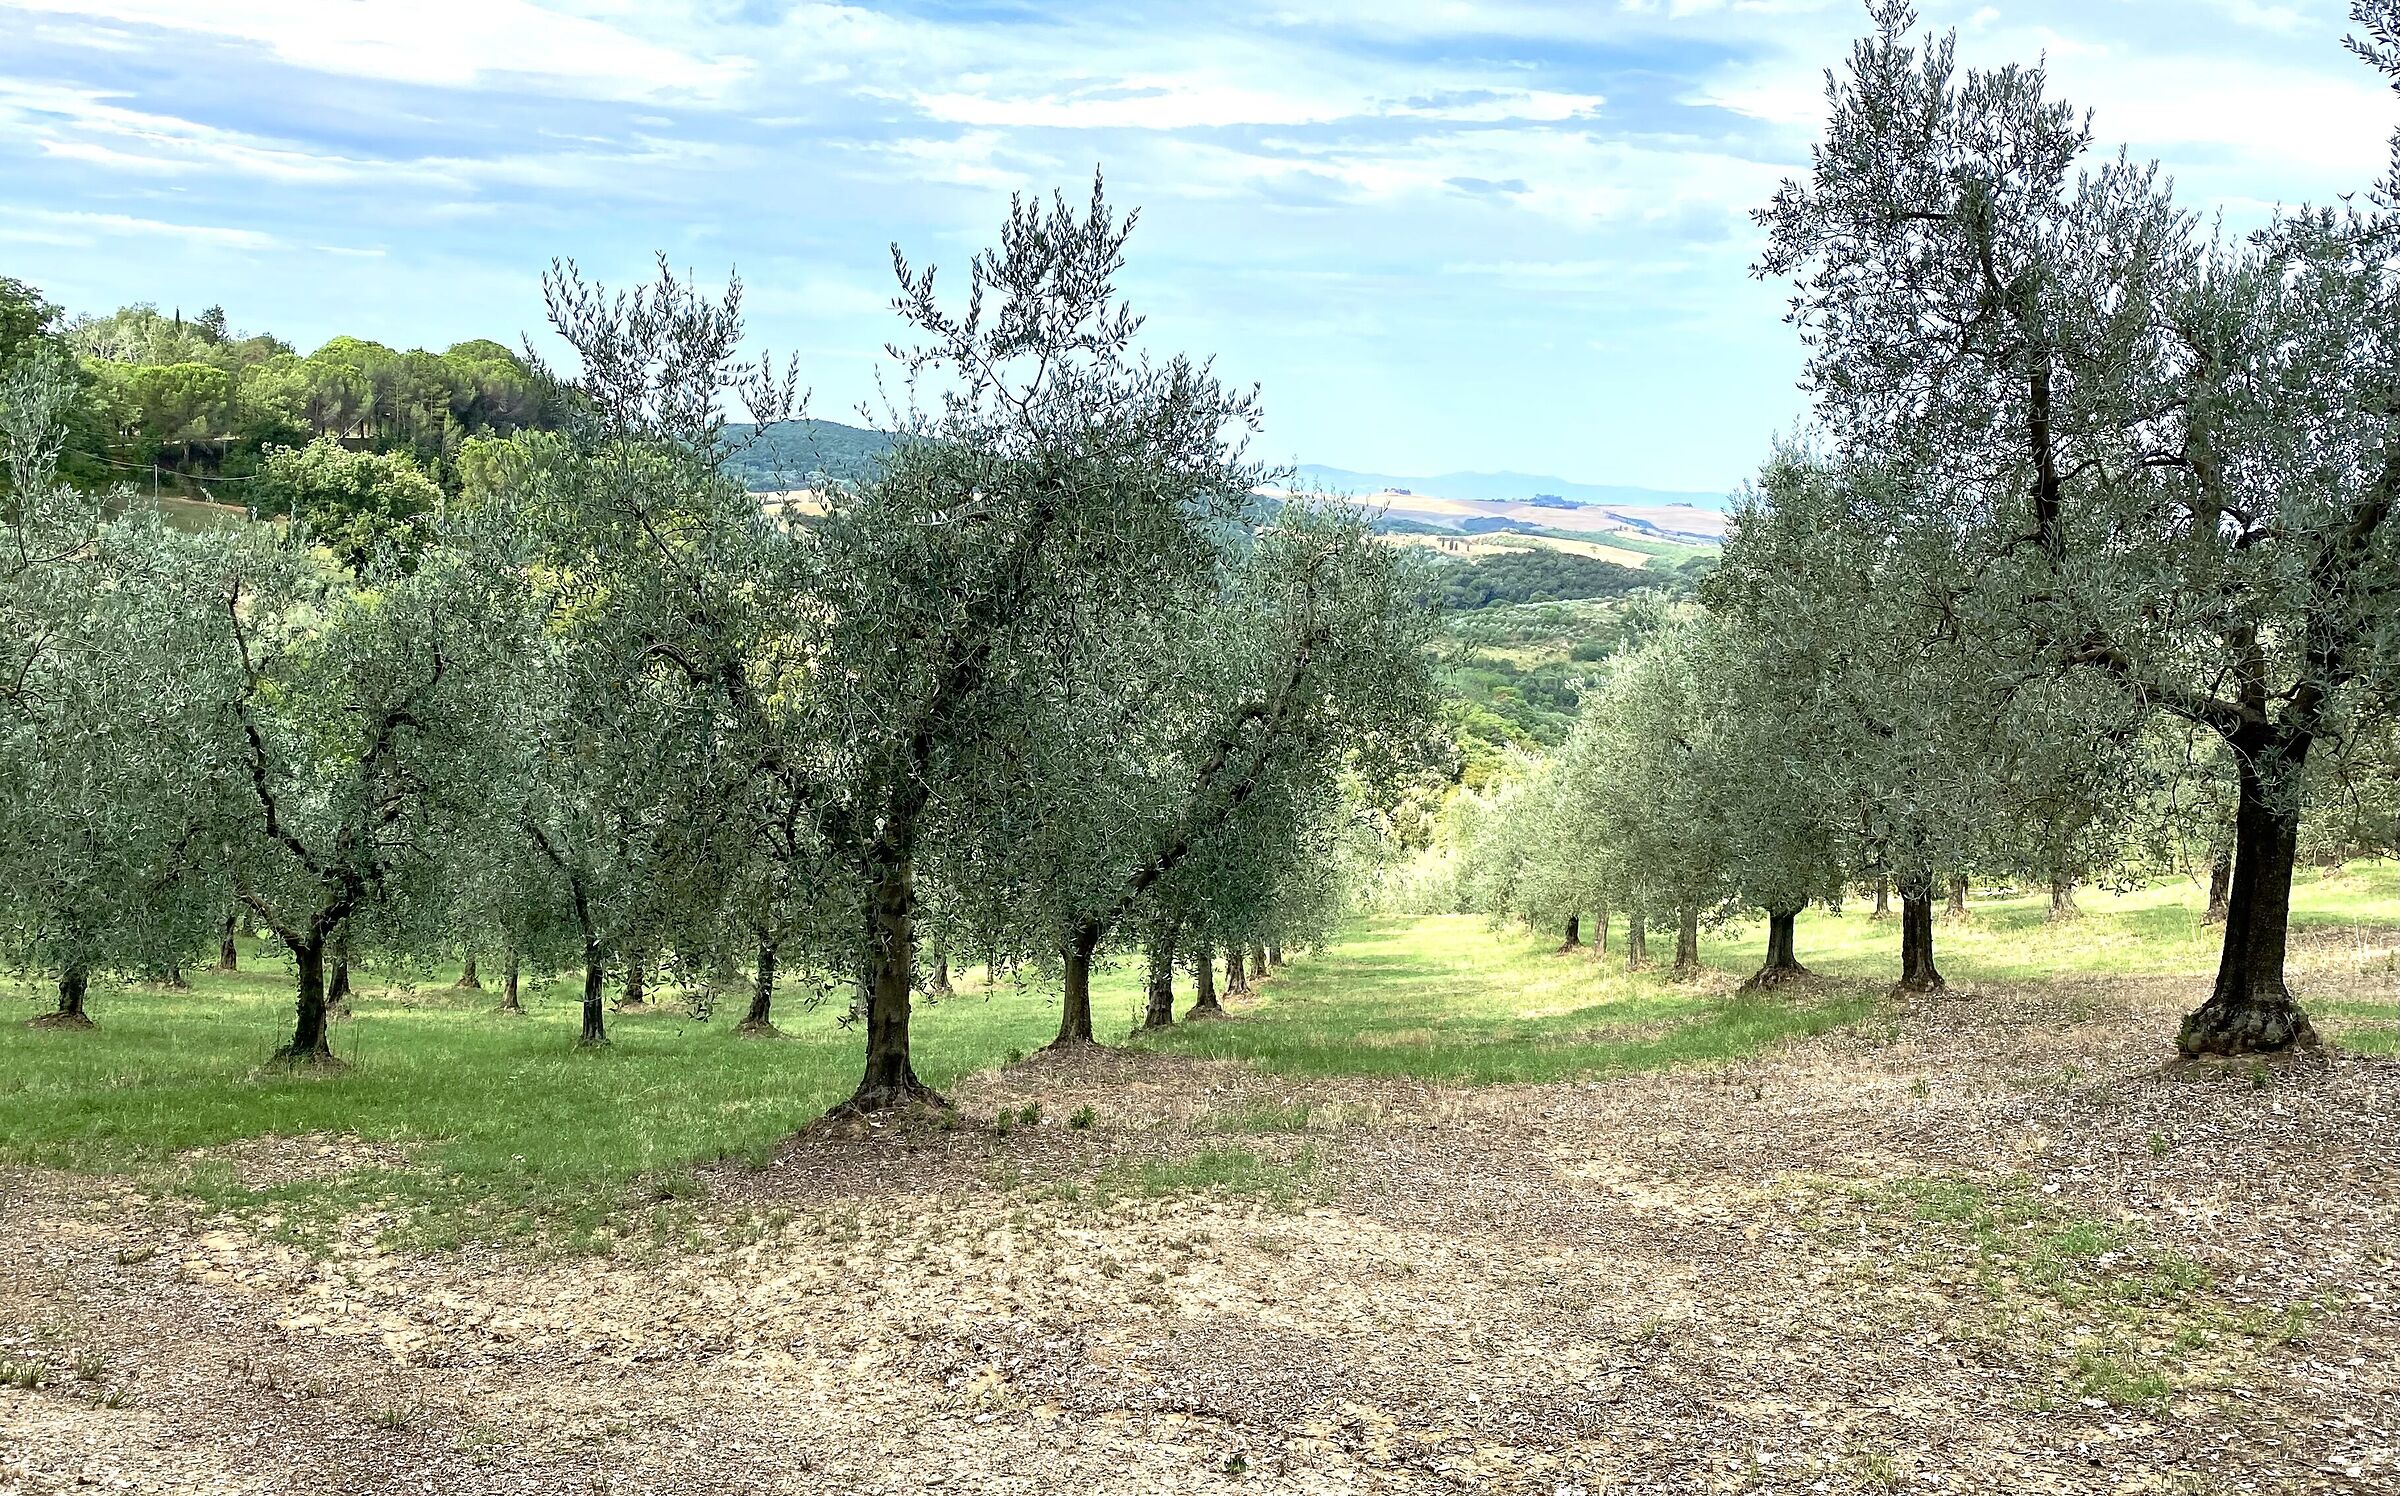 Among the olive trees...